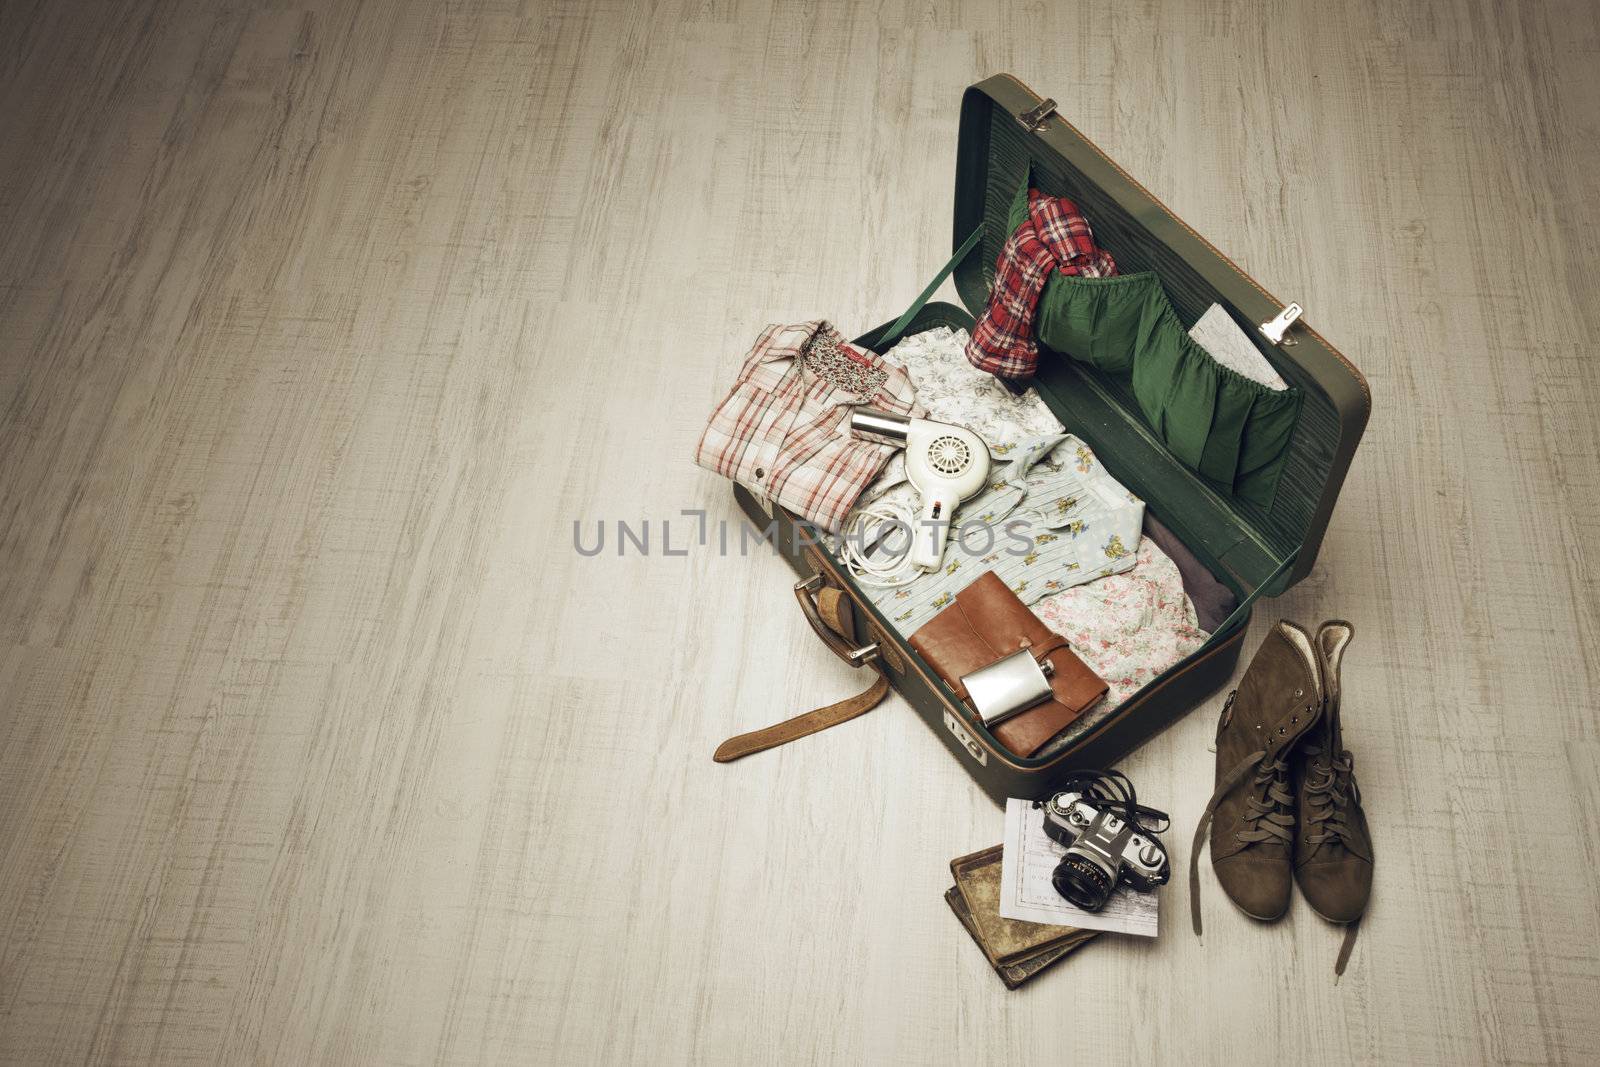 Vintage suitcase open on a wood floor in an empty room